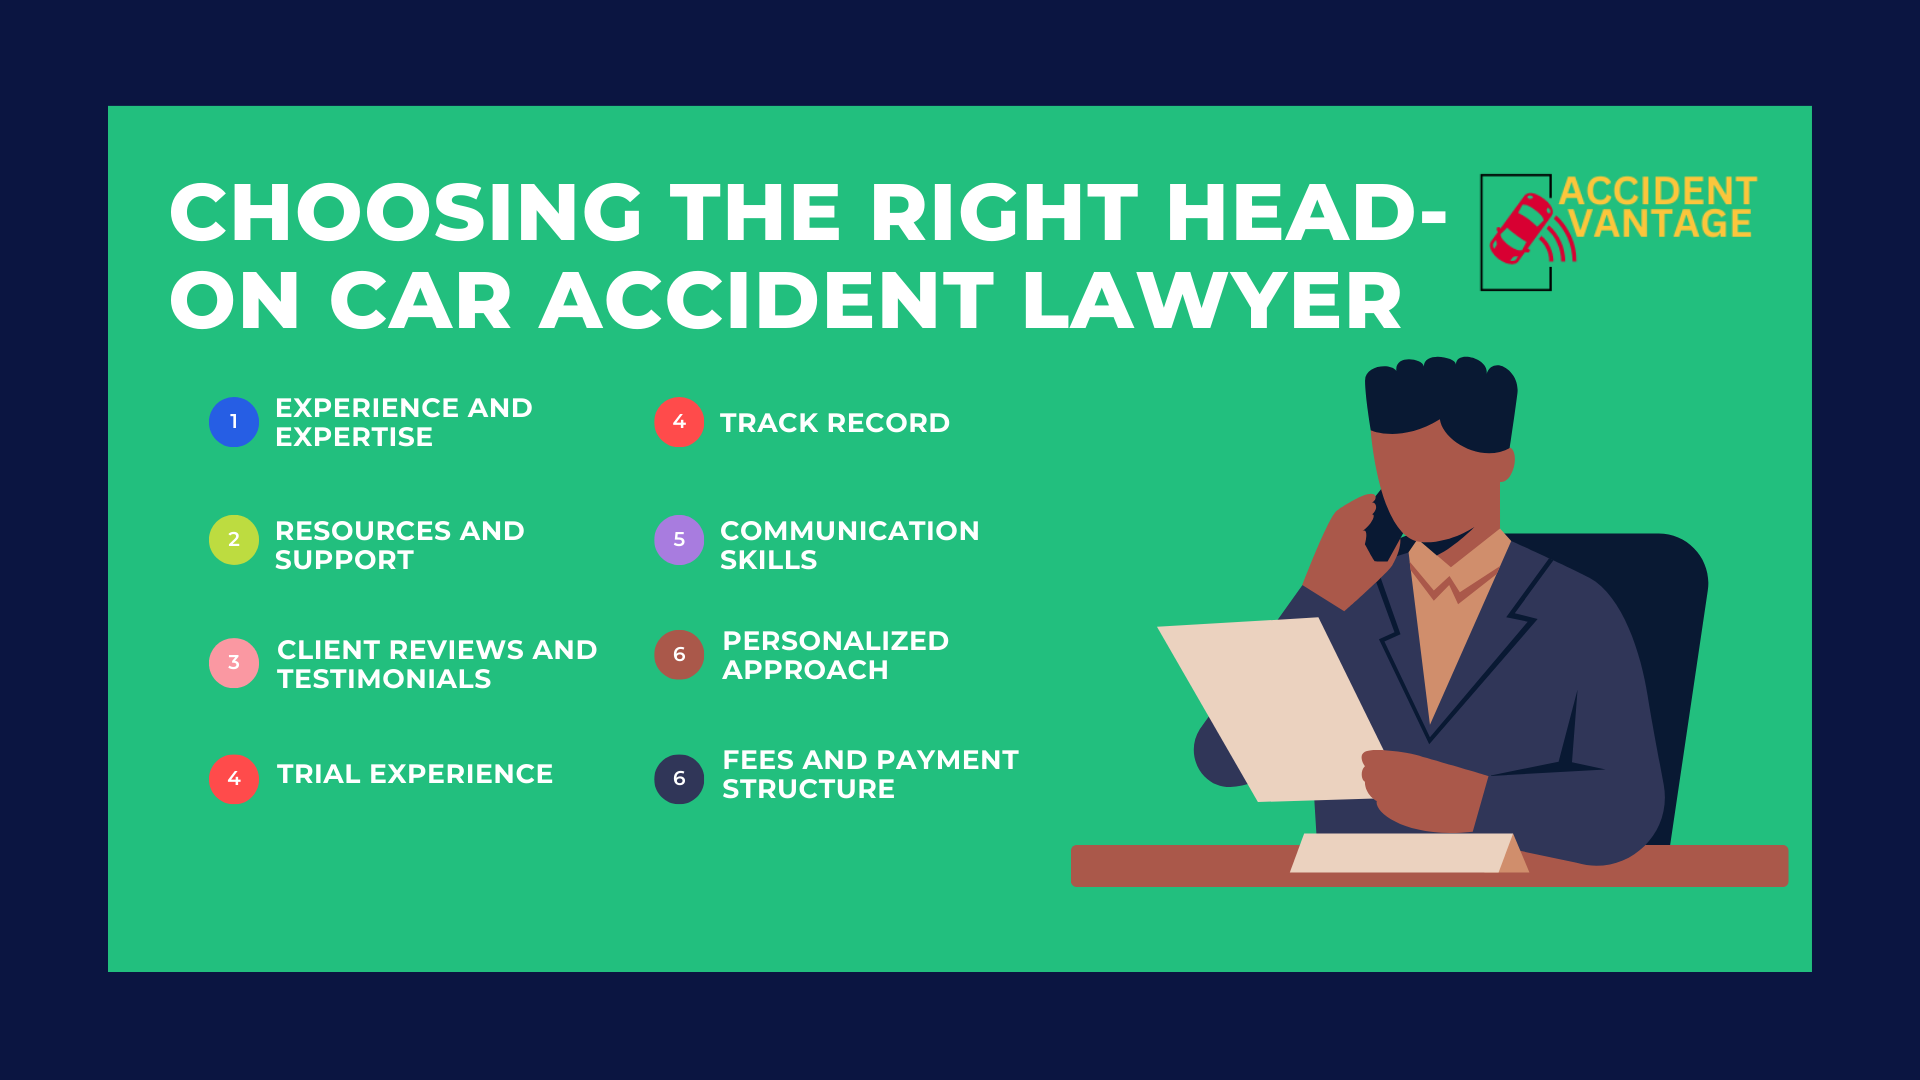 Choosing the Right Head-On Car Accident Lawyer